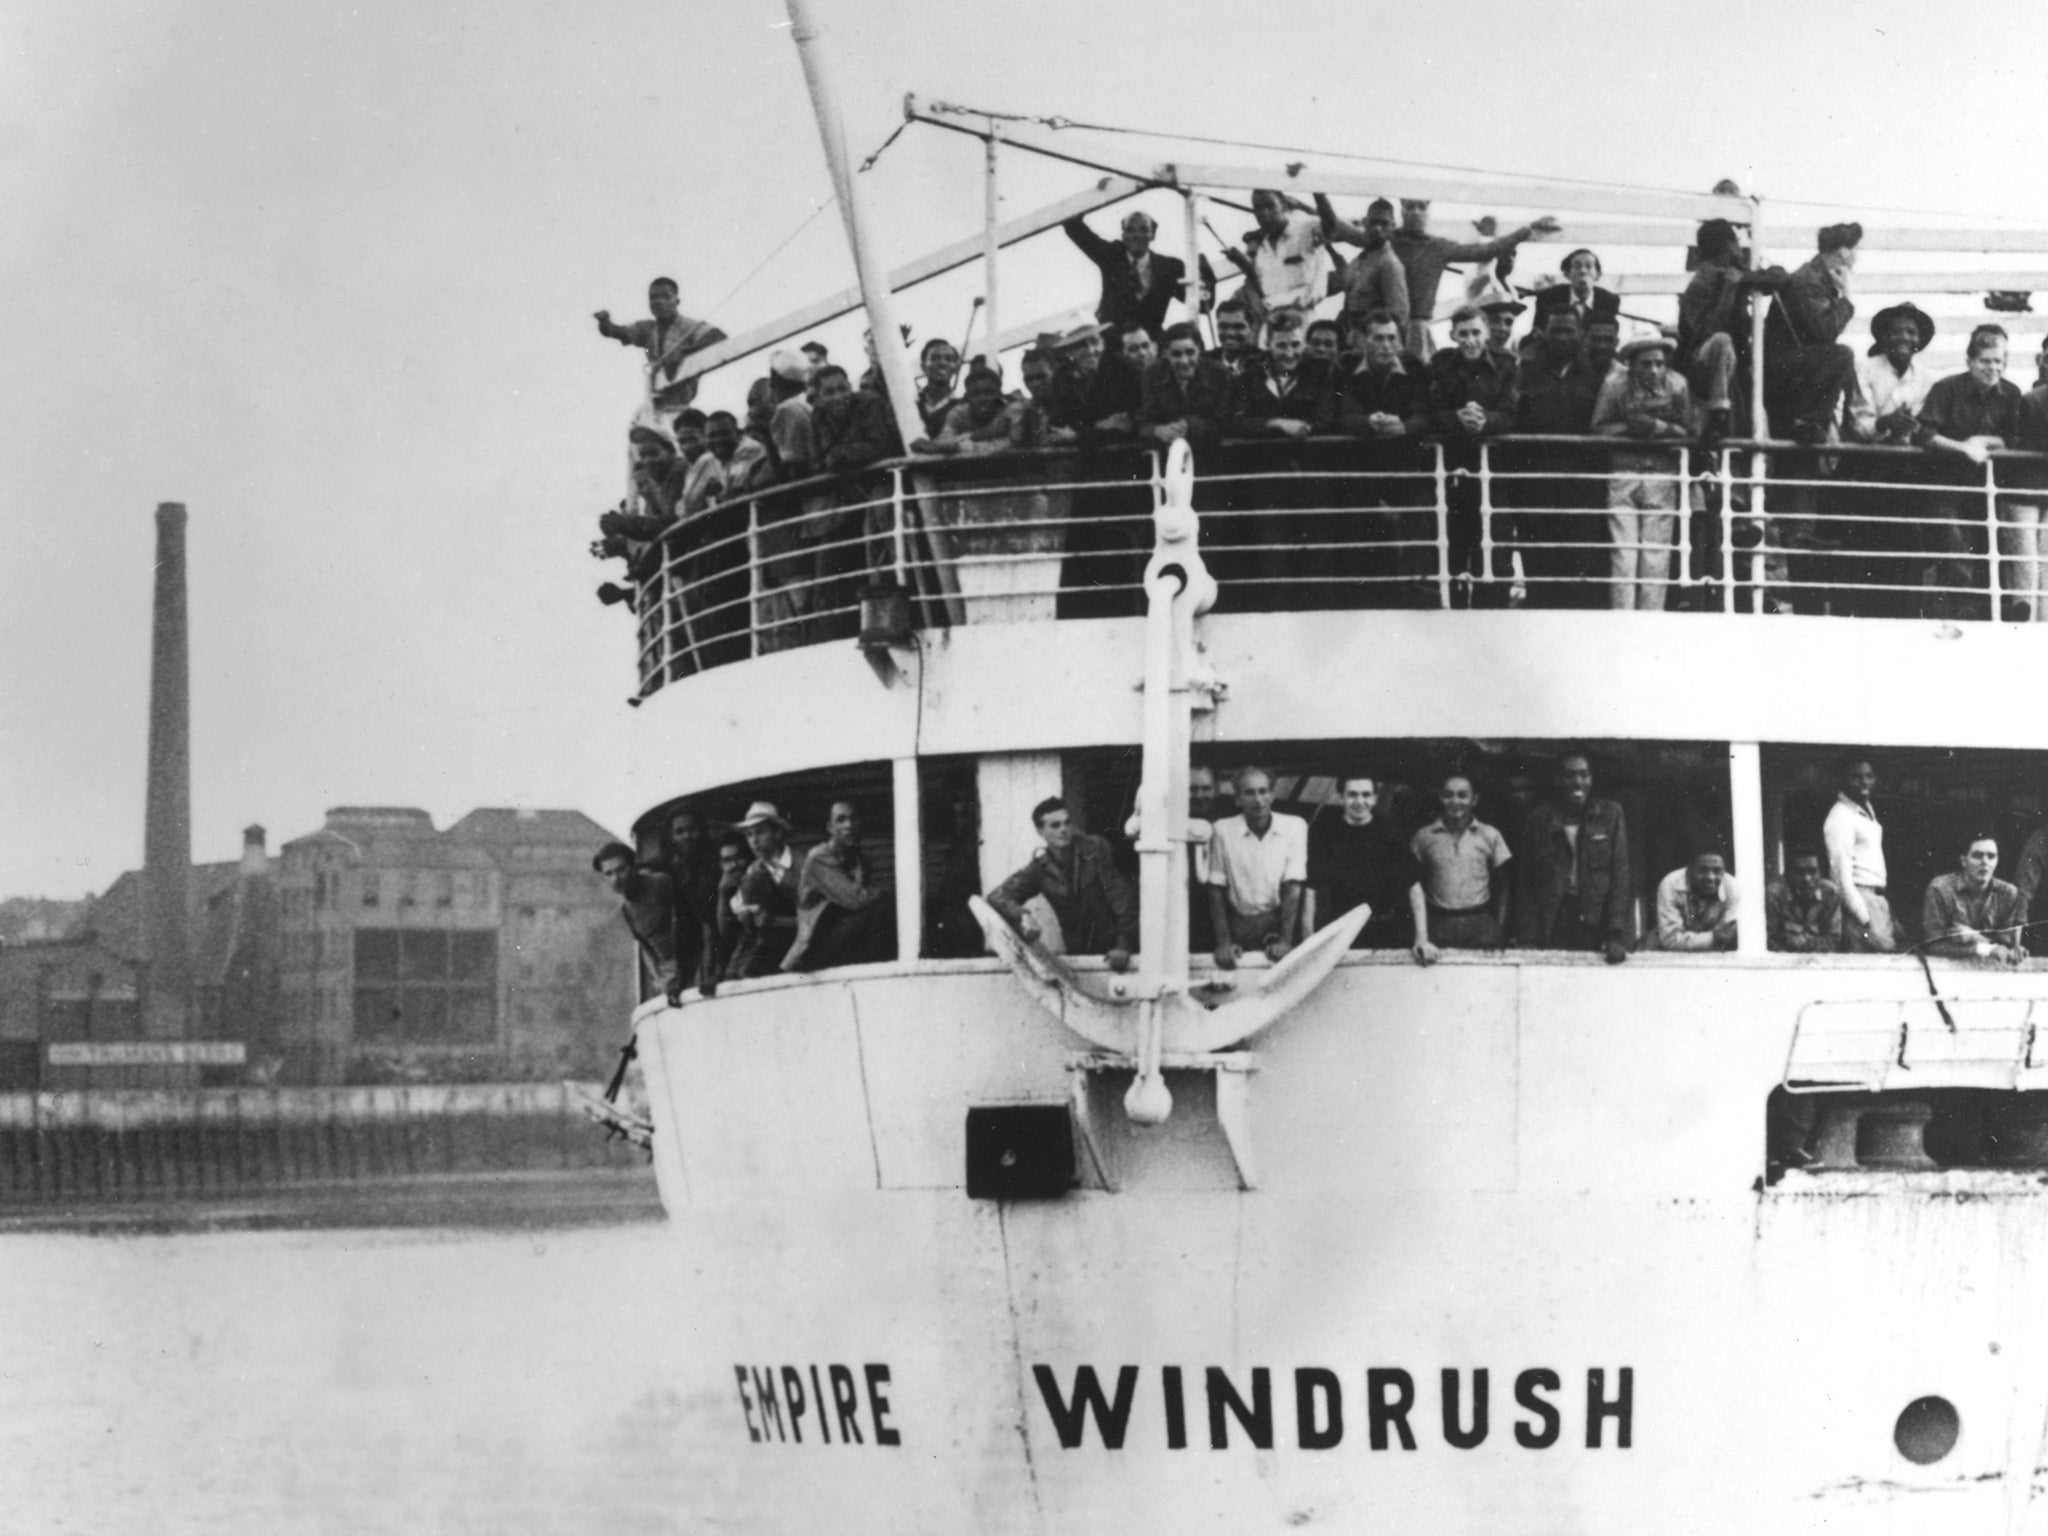 The Home Office has been accused of treating Windrush victims ‘callously’